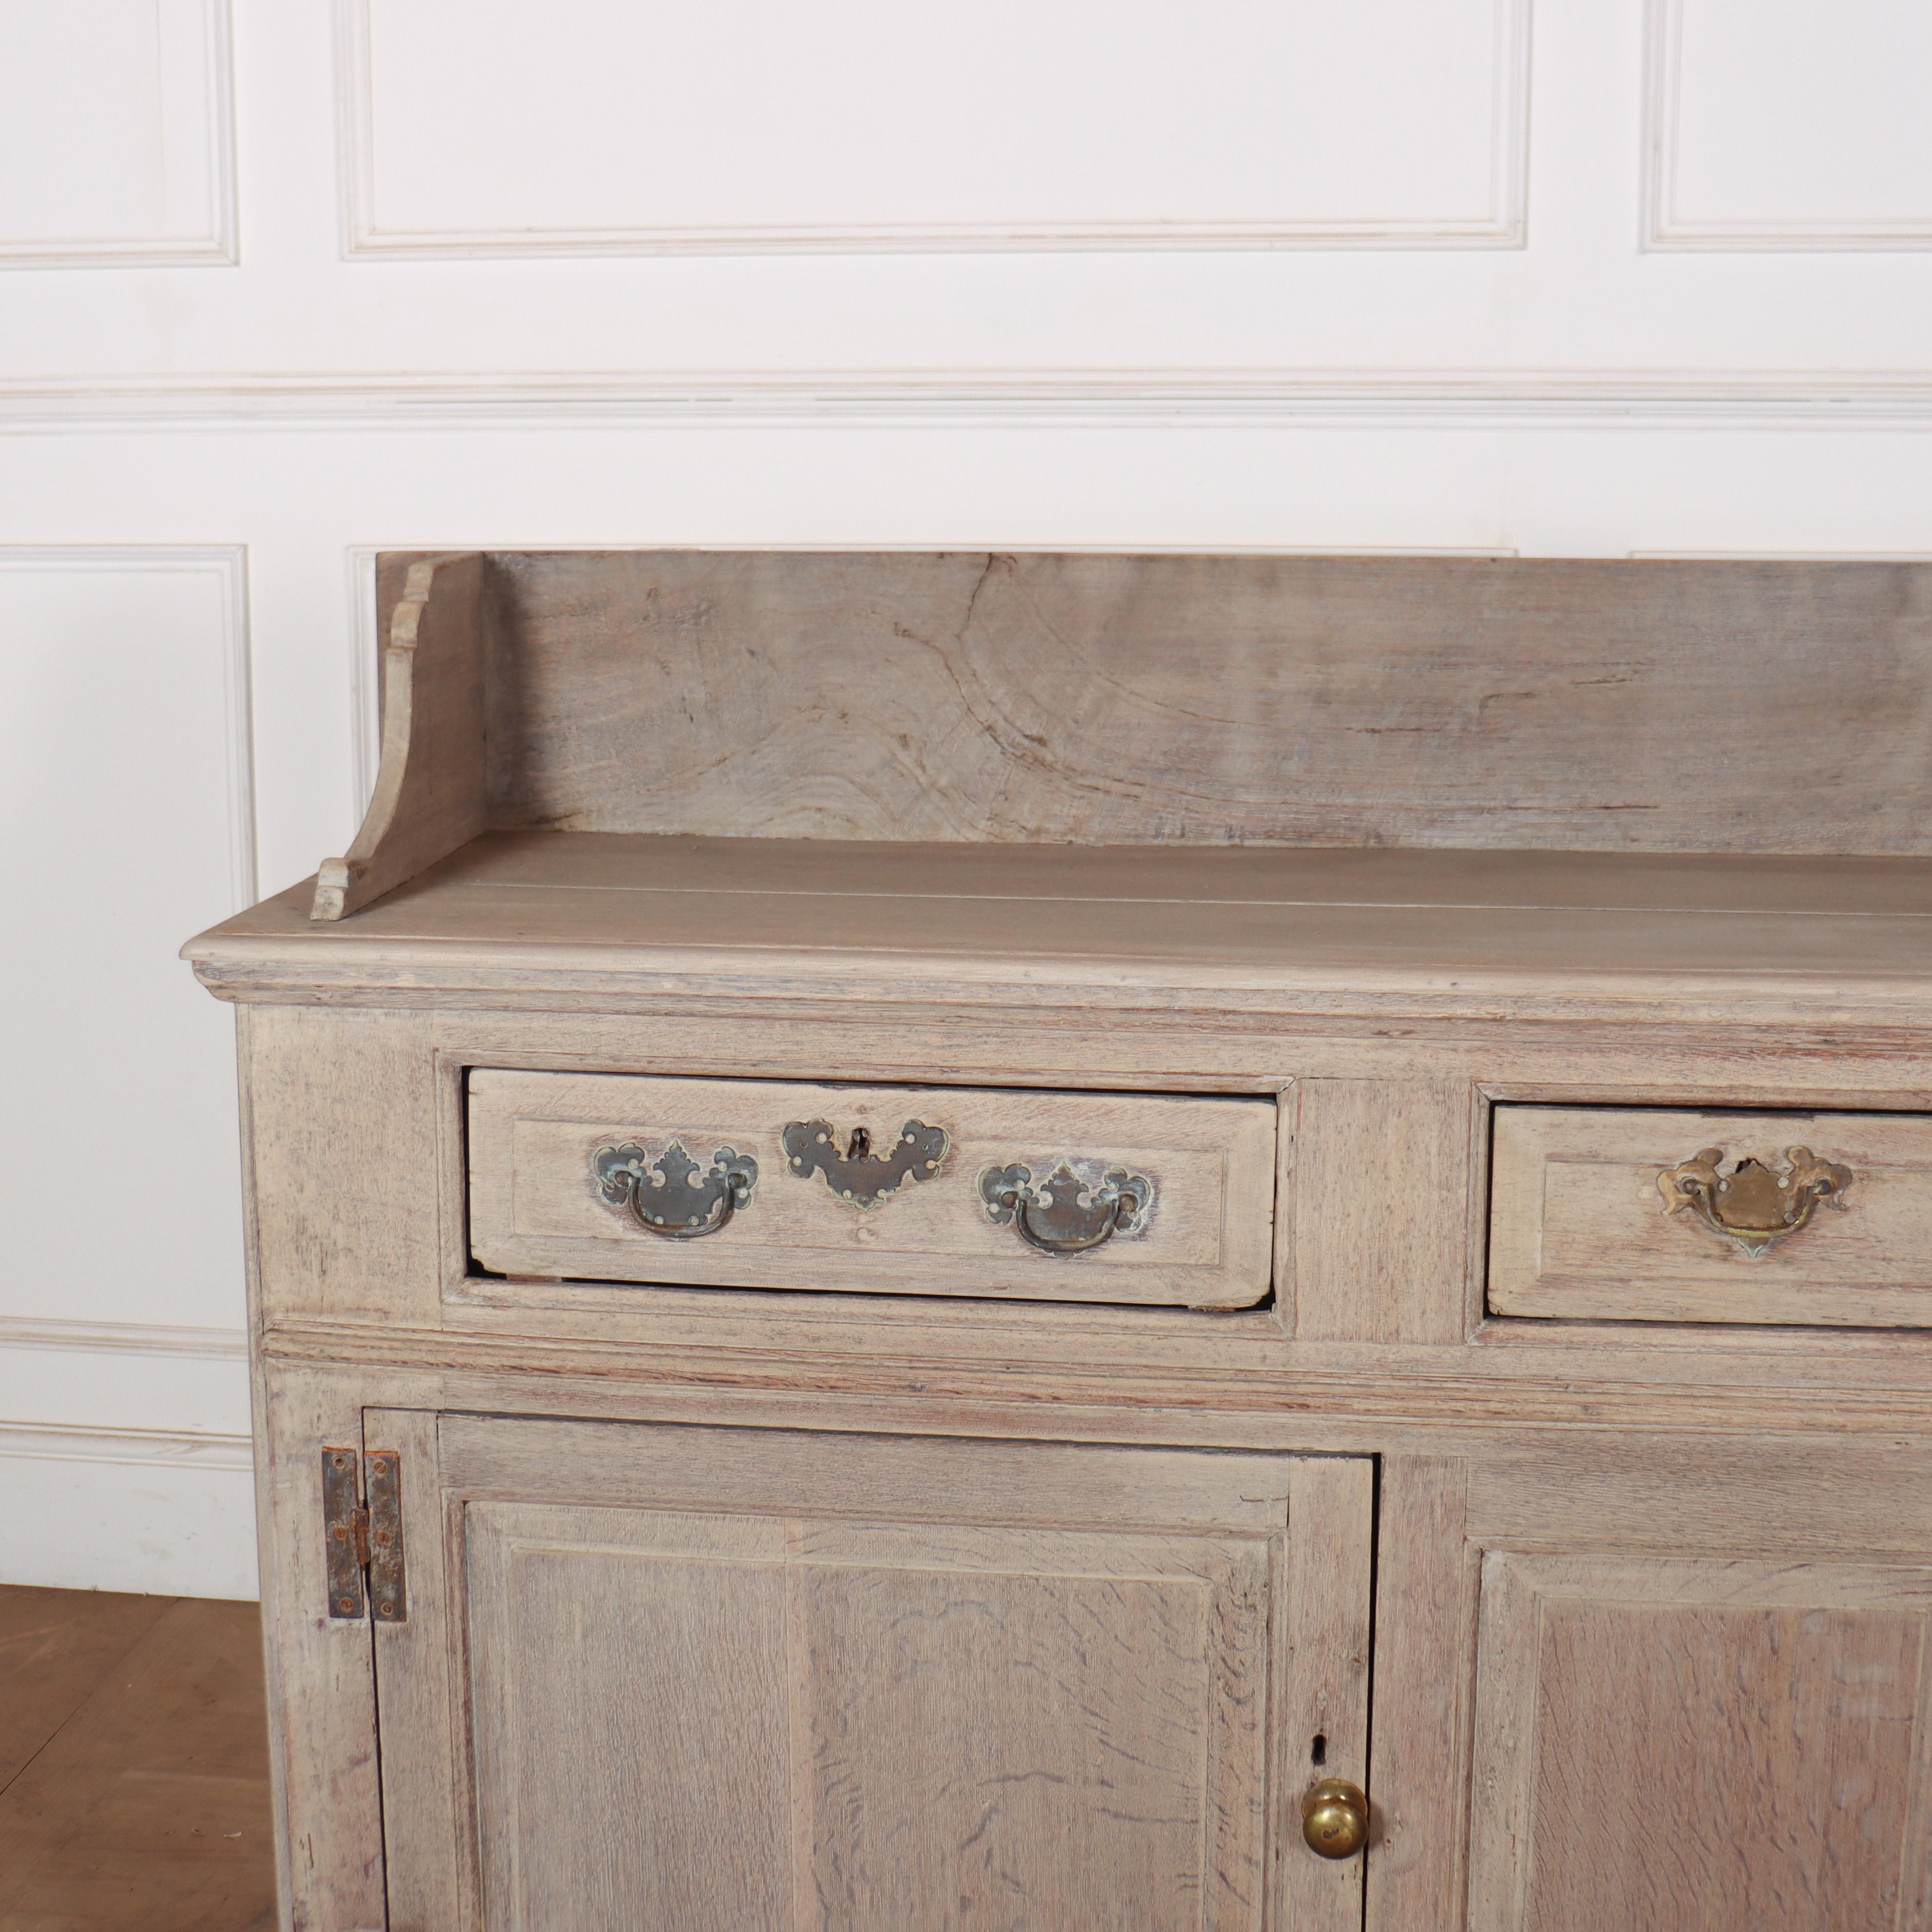 18th C English bleached oak dresser base with a tray back. 1760.

Height to worktop is 35